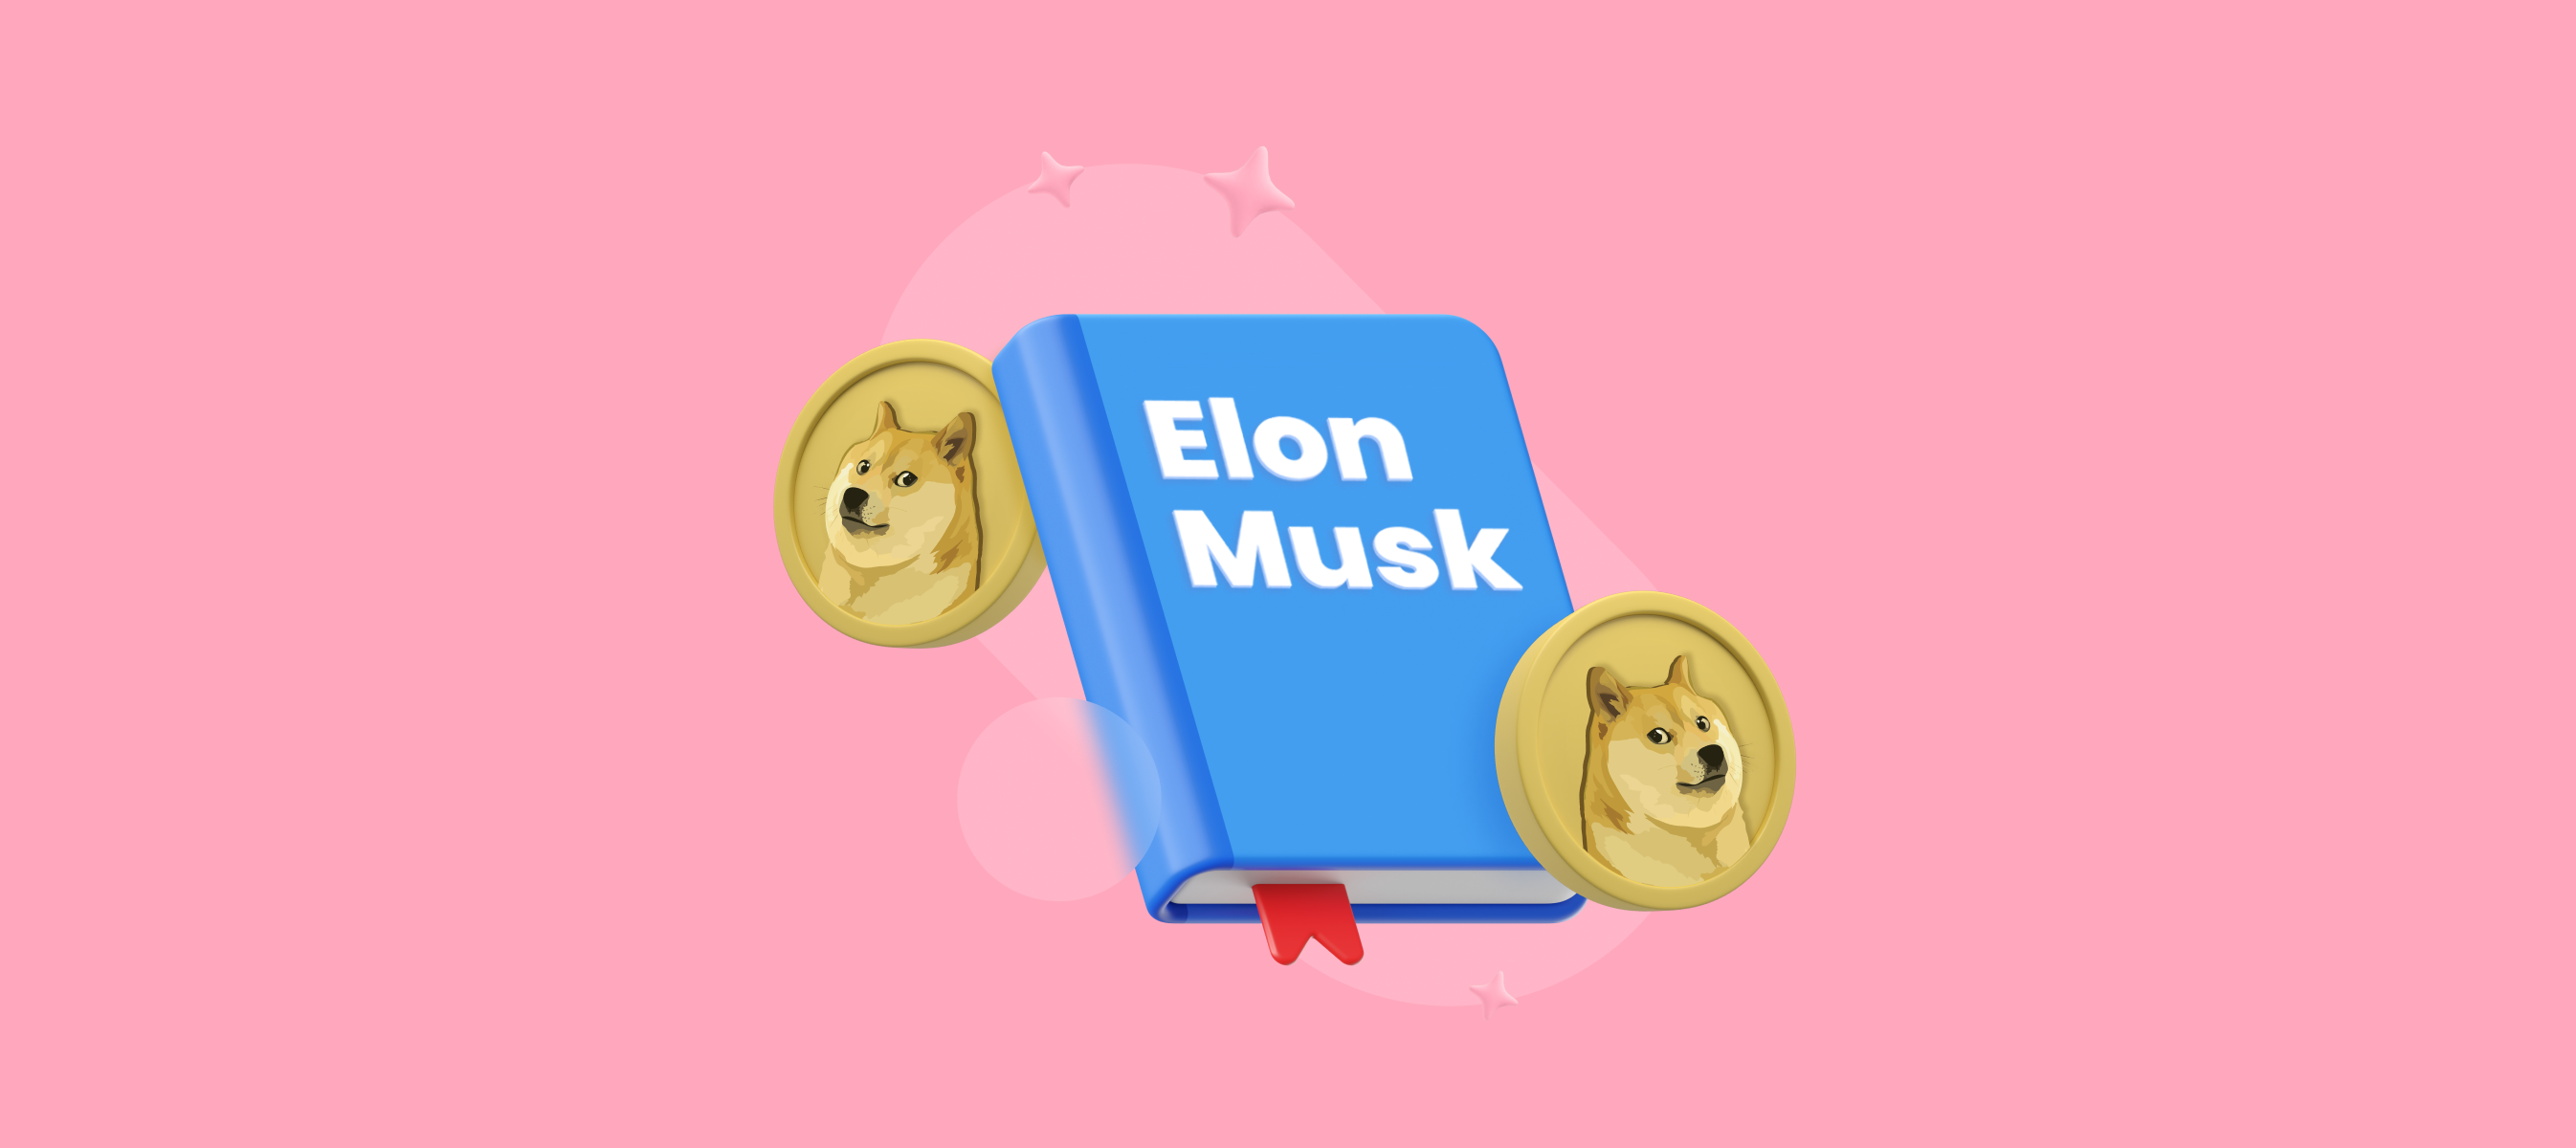 elon-musks-unveiled-secrets-biography-and-dogecoin-connection